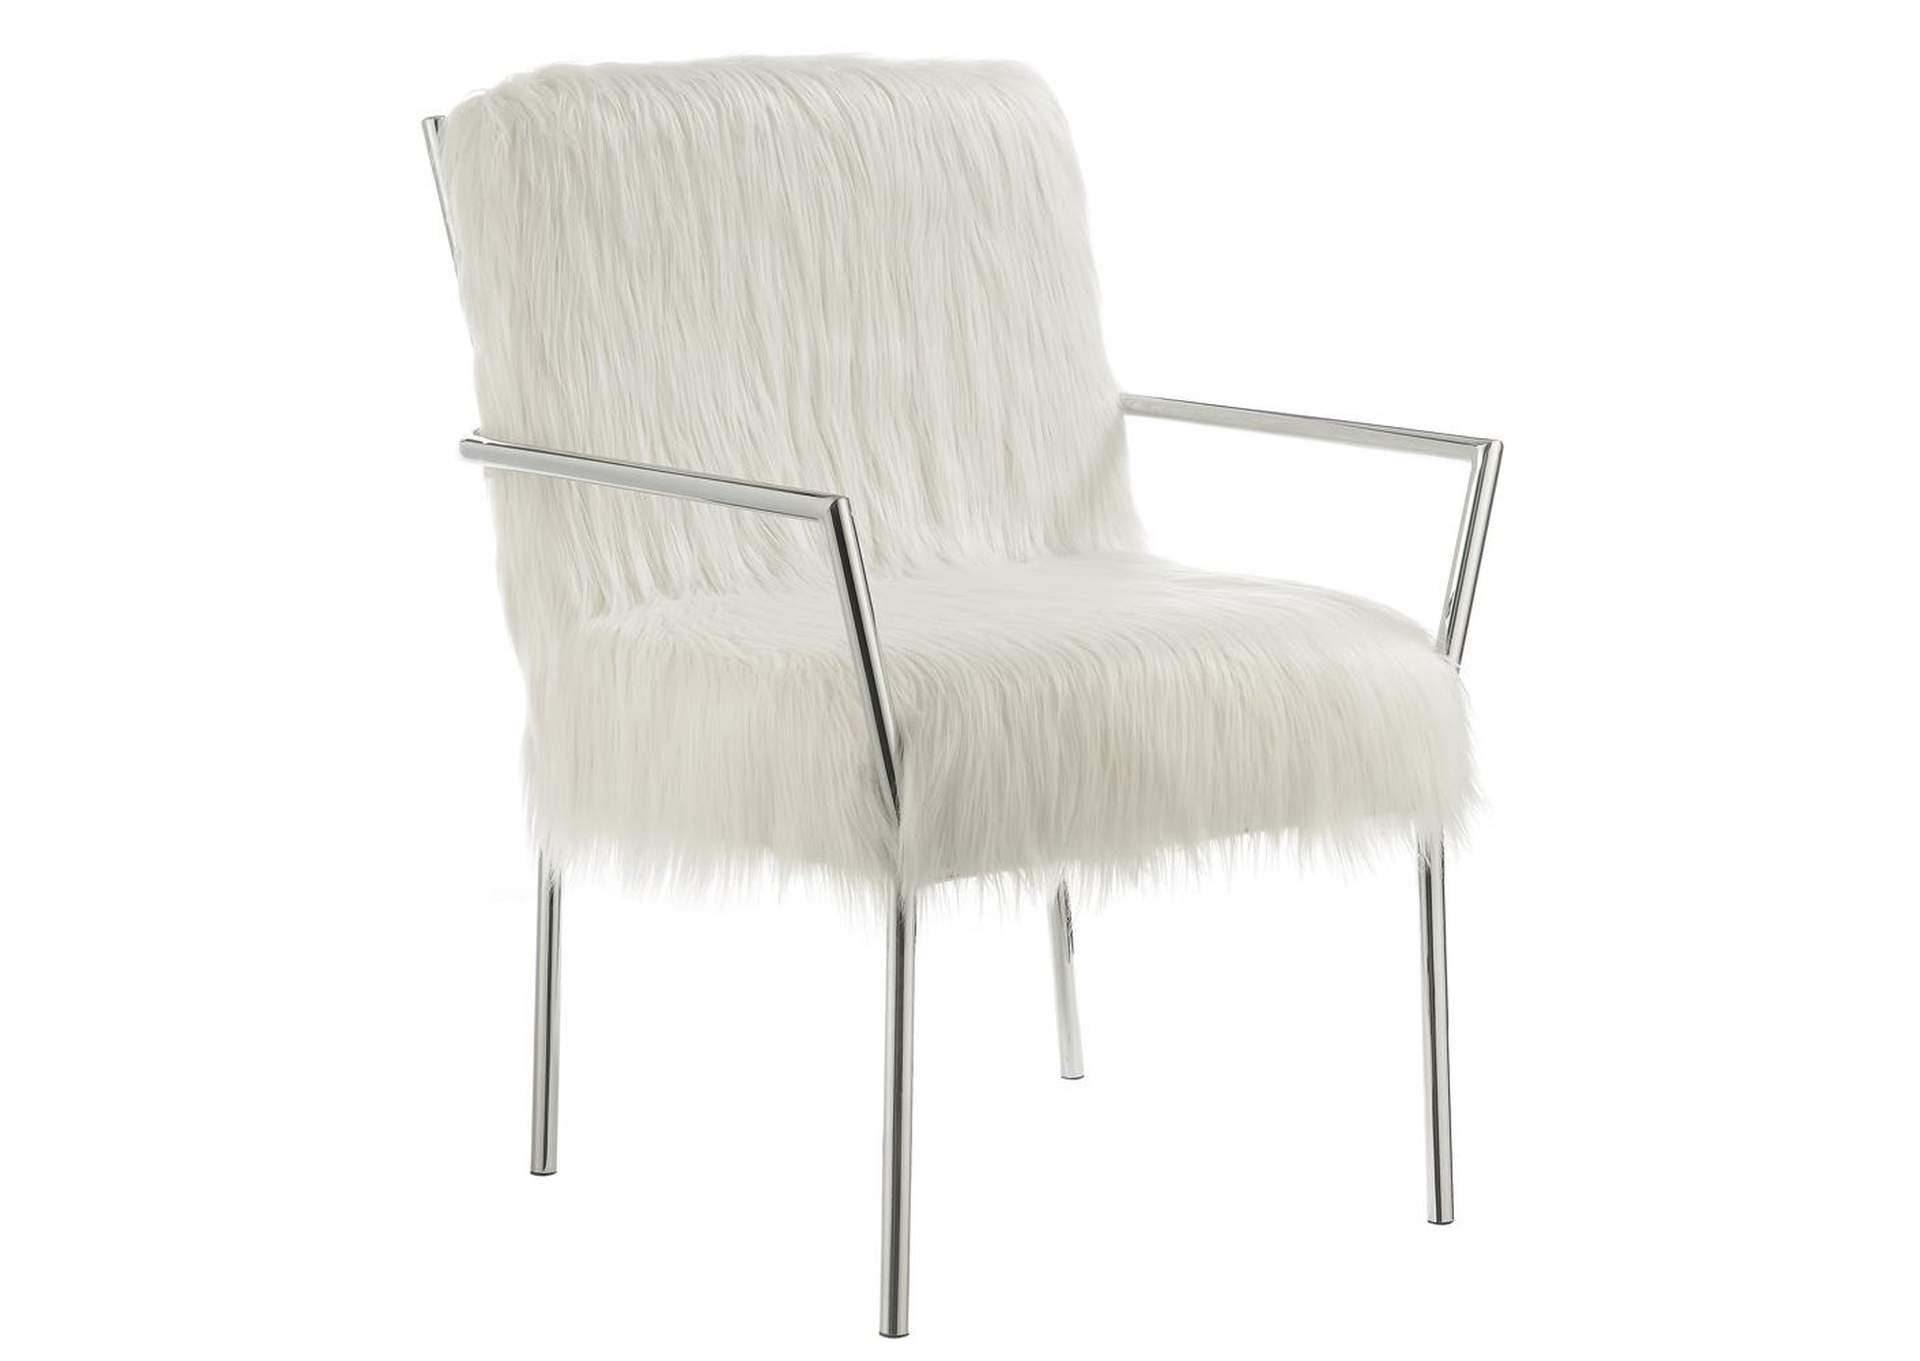 Contemporary White Accent Chair,Coaster Furniture